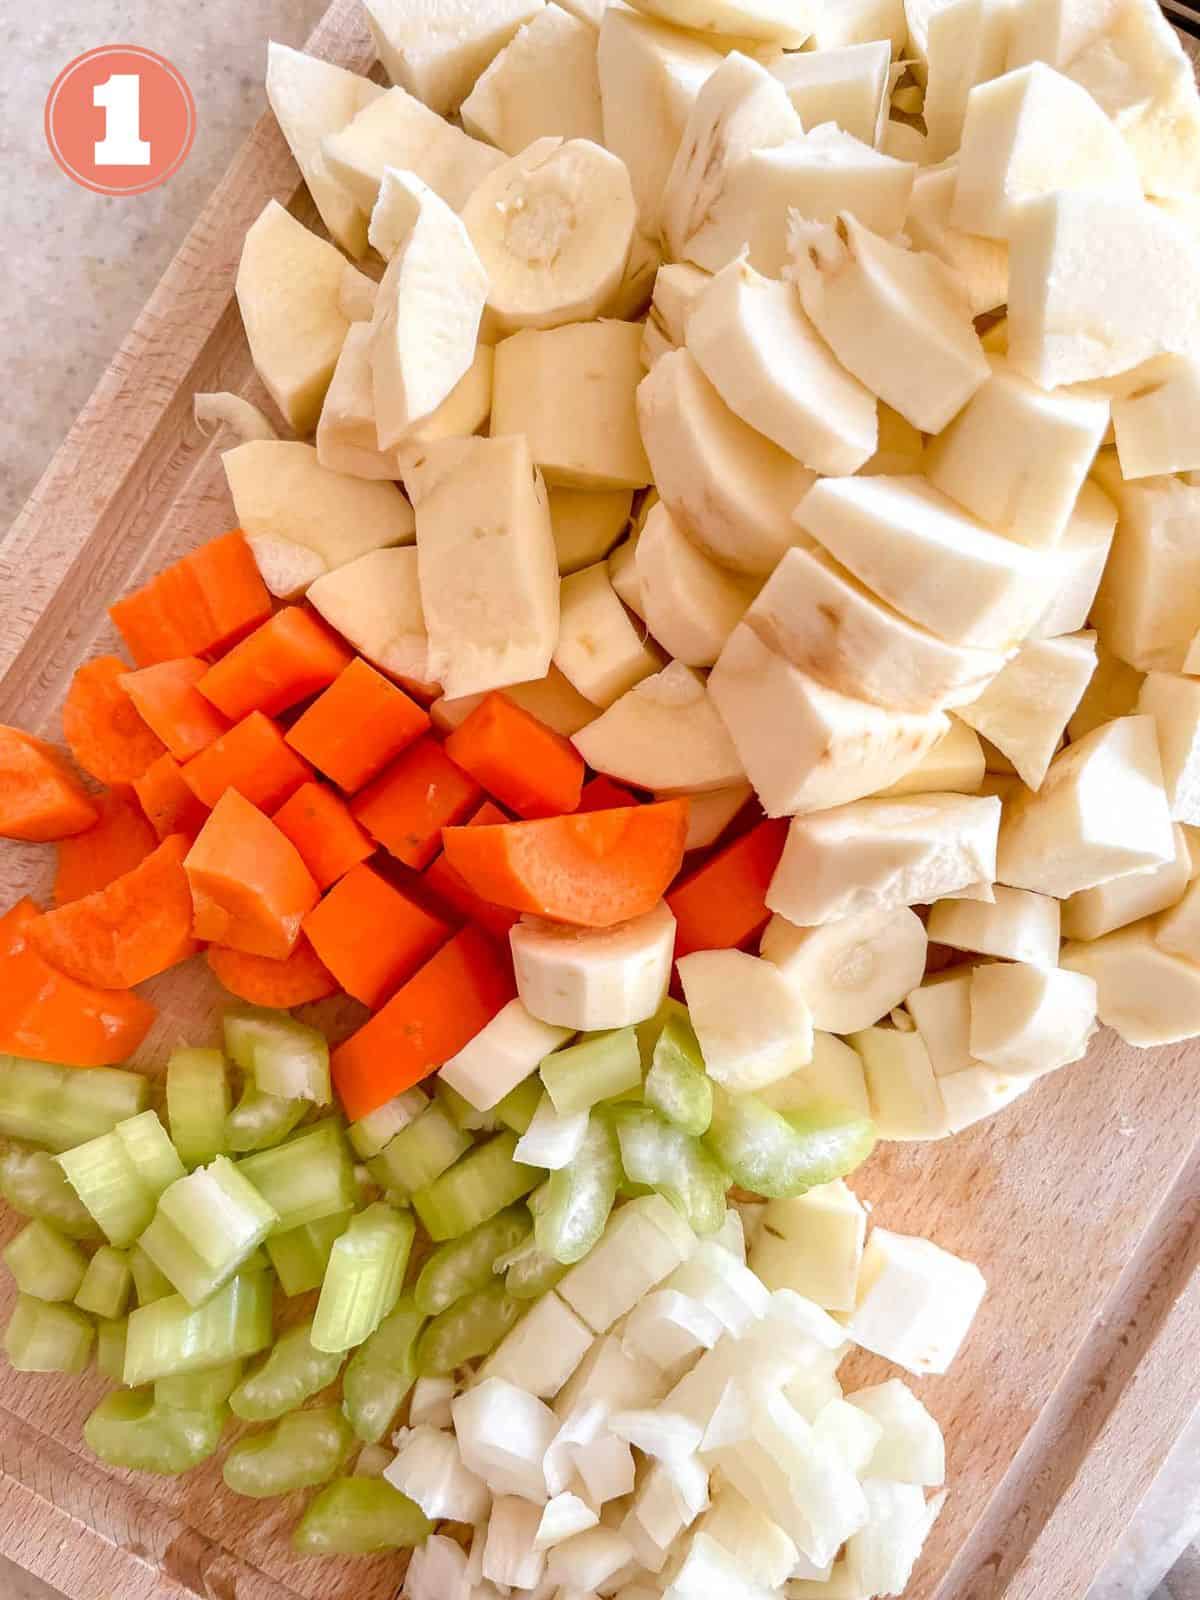 diced parsnips, carrot, celery and onion on a wooden chopping board labelled number one.